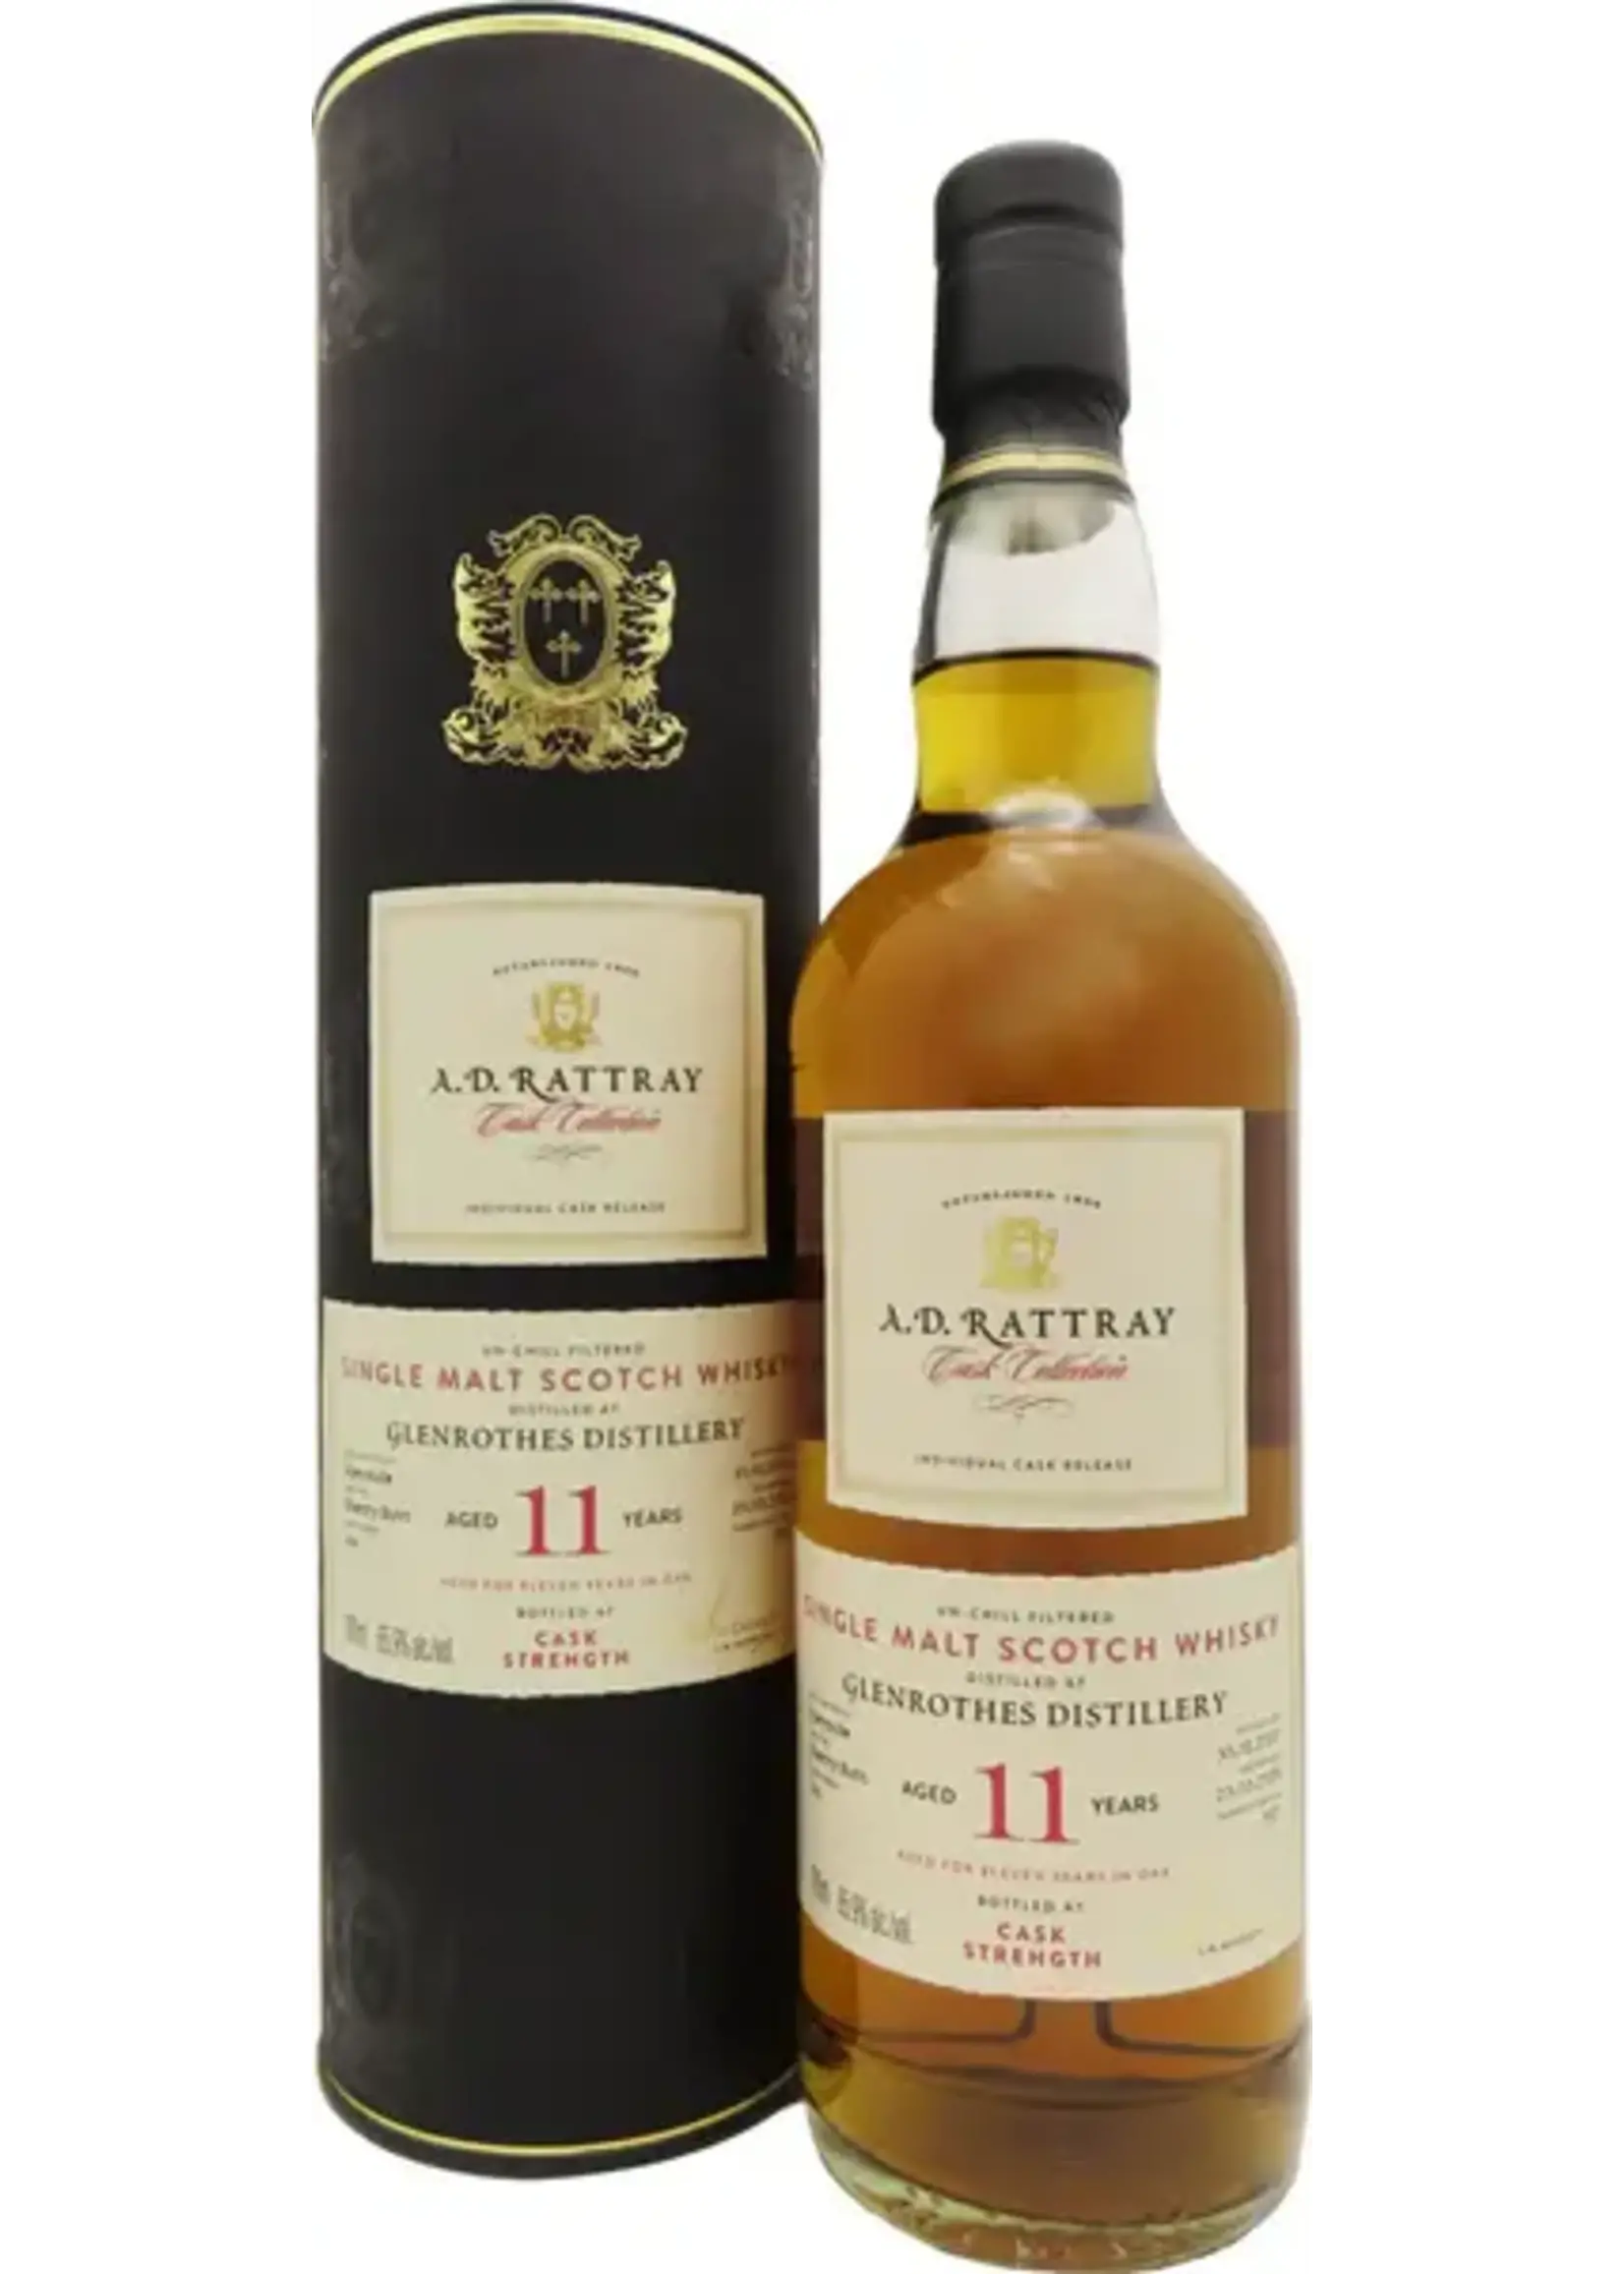 A.D. Rattray AD Rattray / Glenrothes 11 Year Old Single Malt Scotch Whisky / 700mL